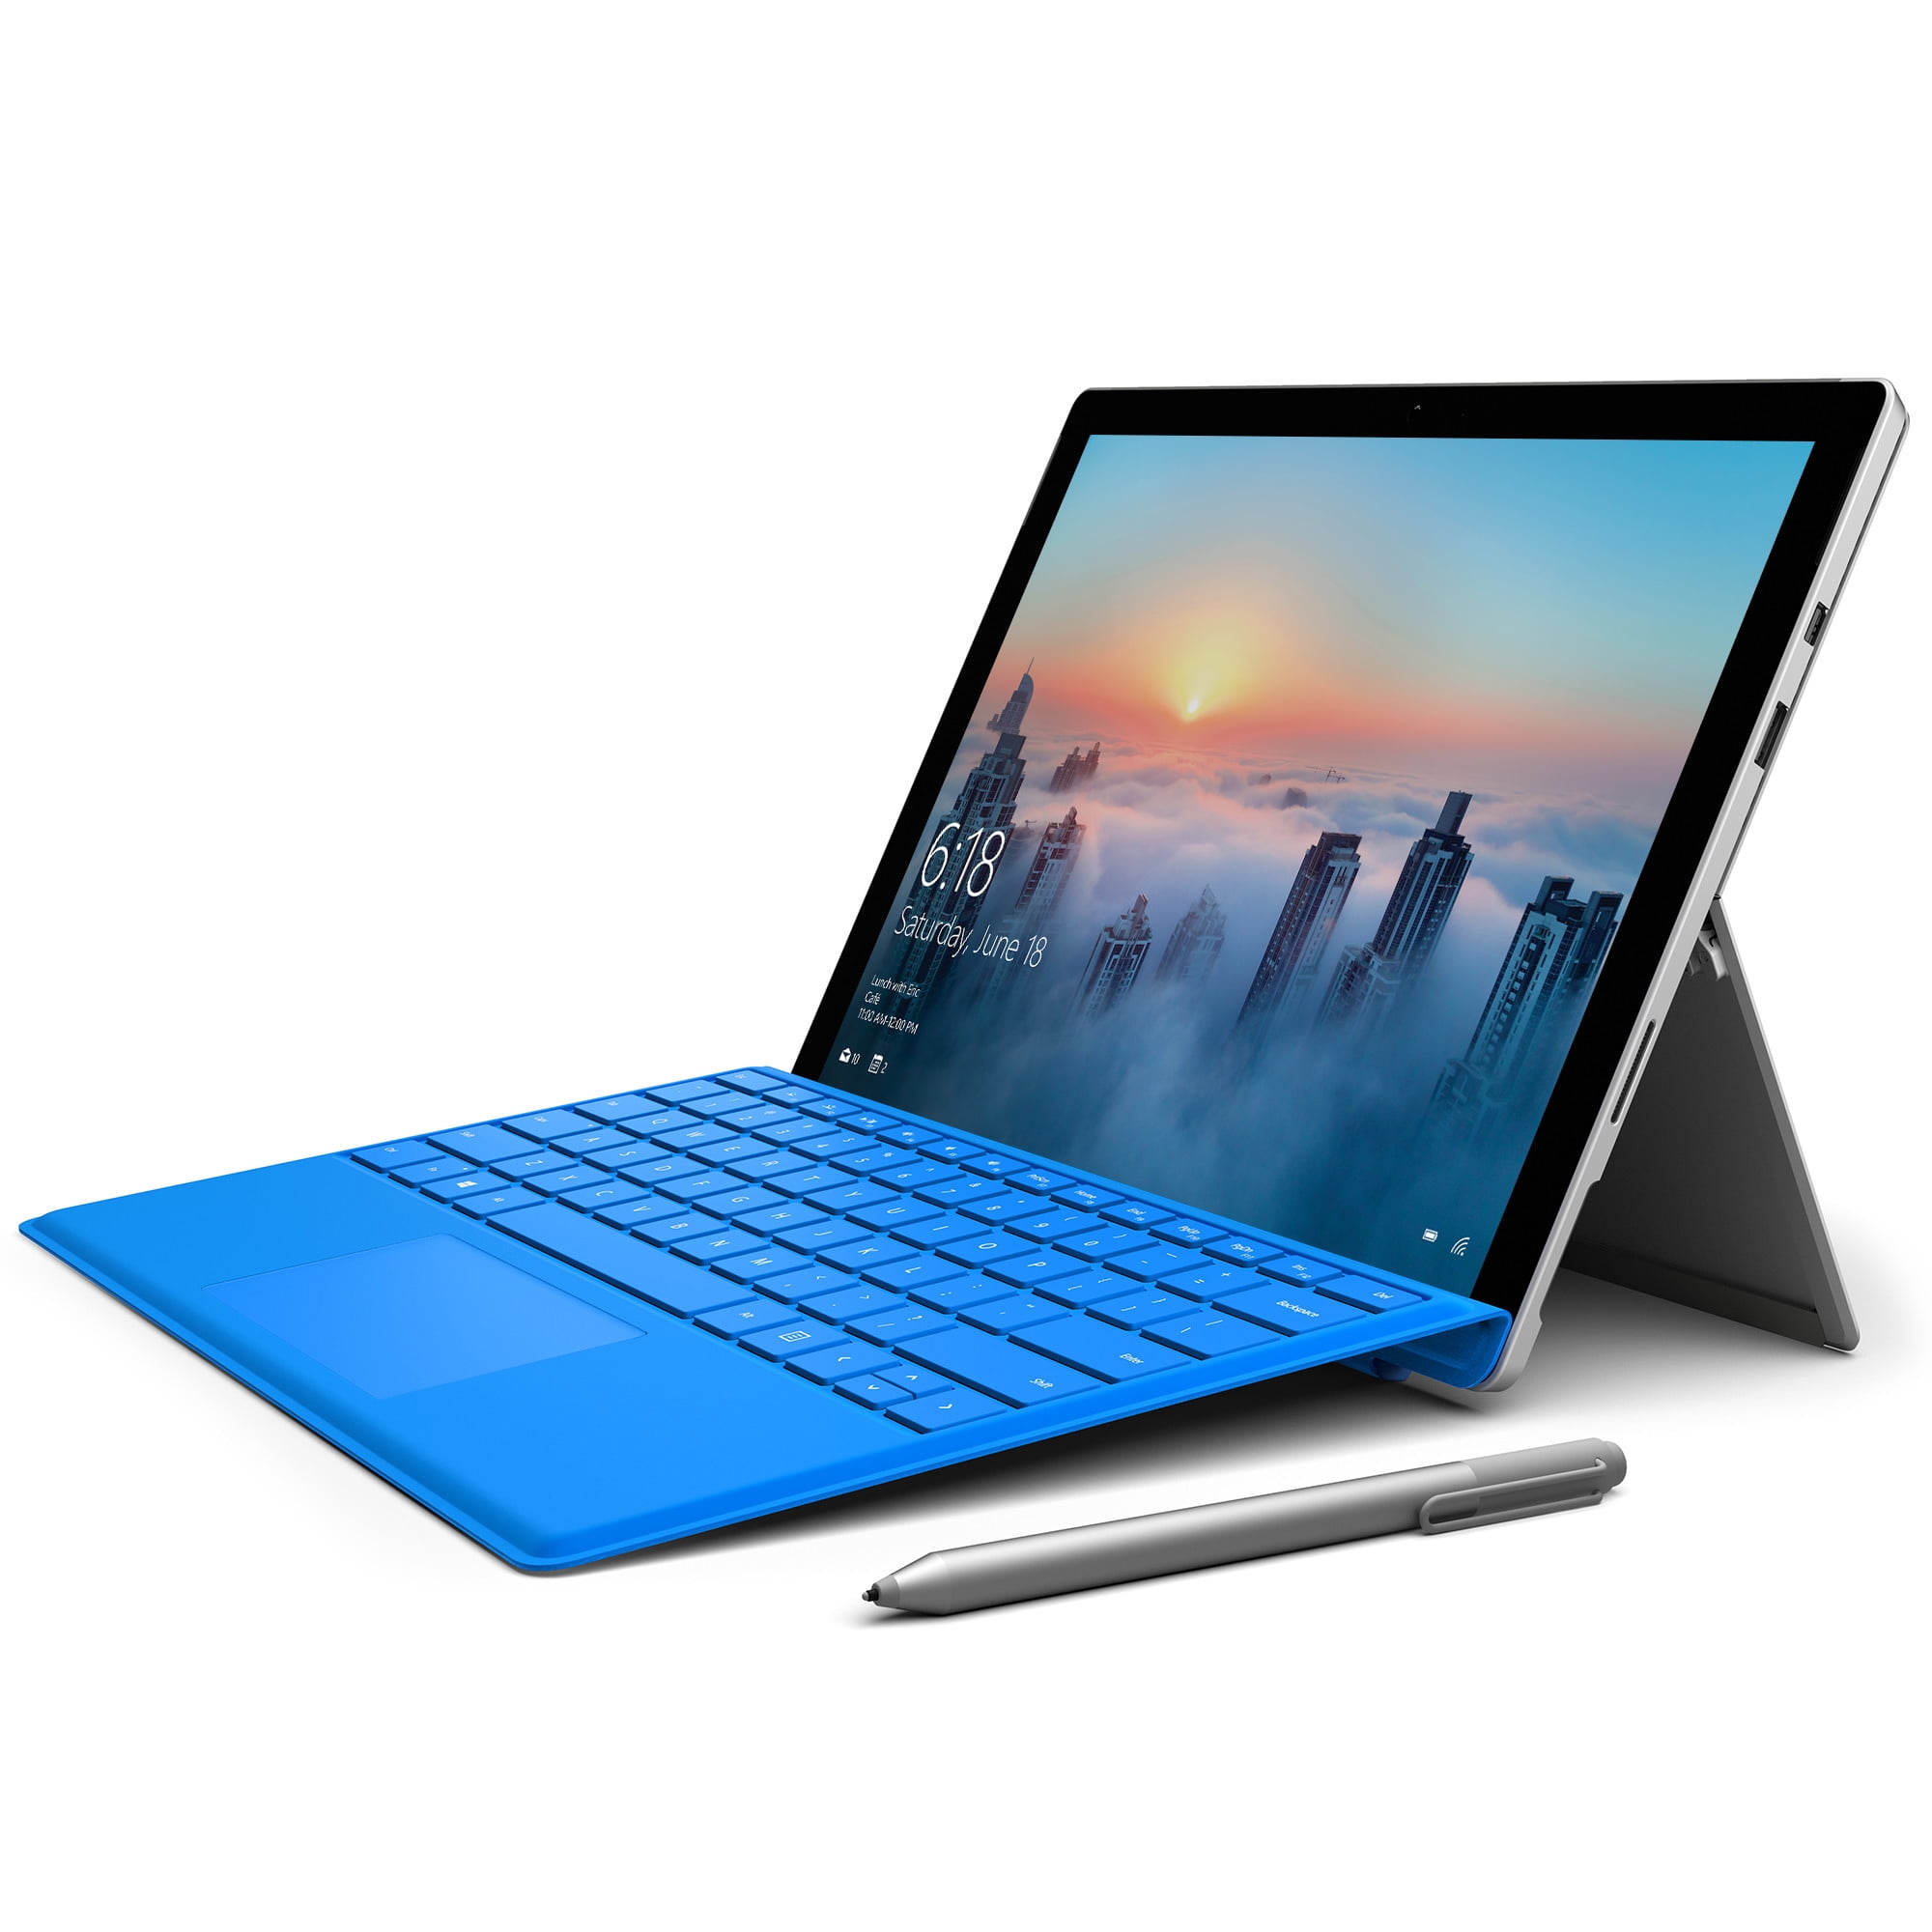 Microsoft Surface Pro 3 Tablet (12-Inch, 128 GB, Intel Core i5 